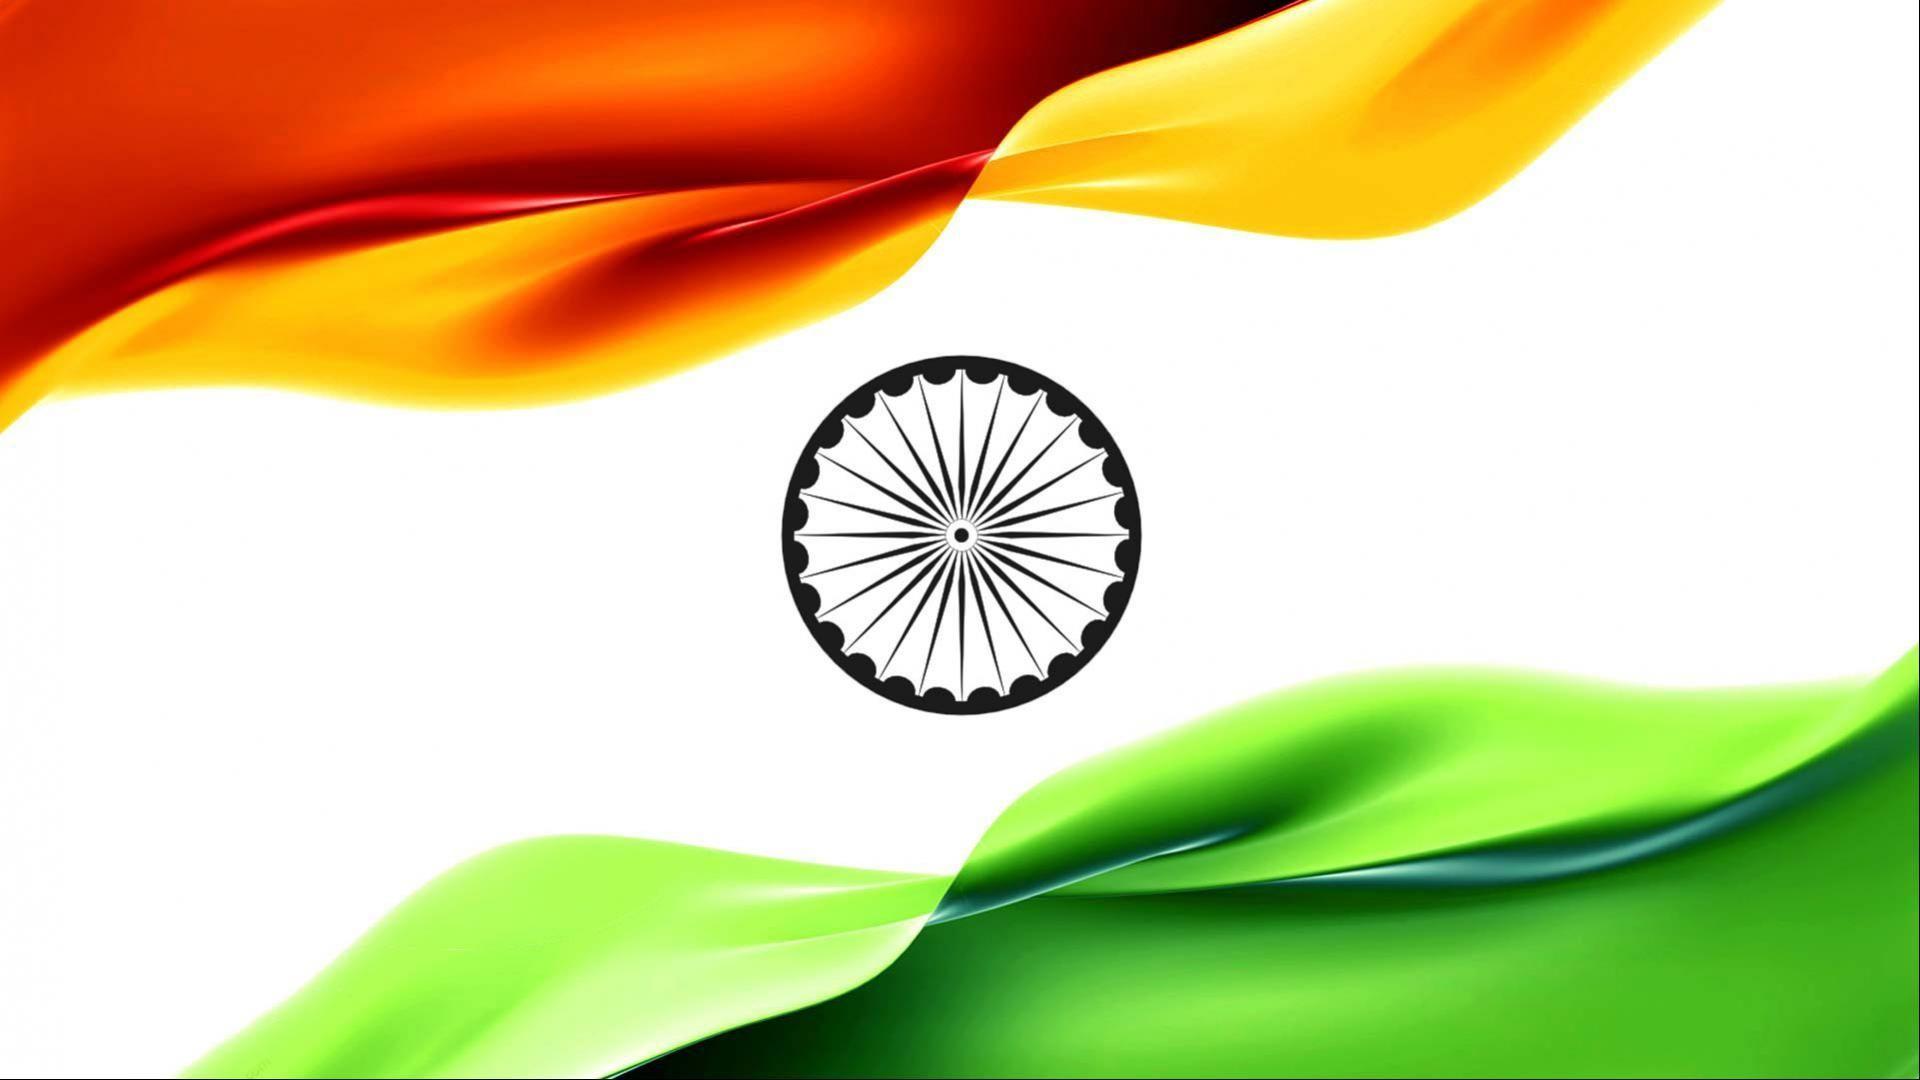 Download Indian Tiranga wallpaper to your cell phone